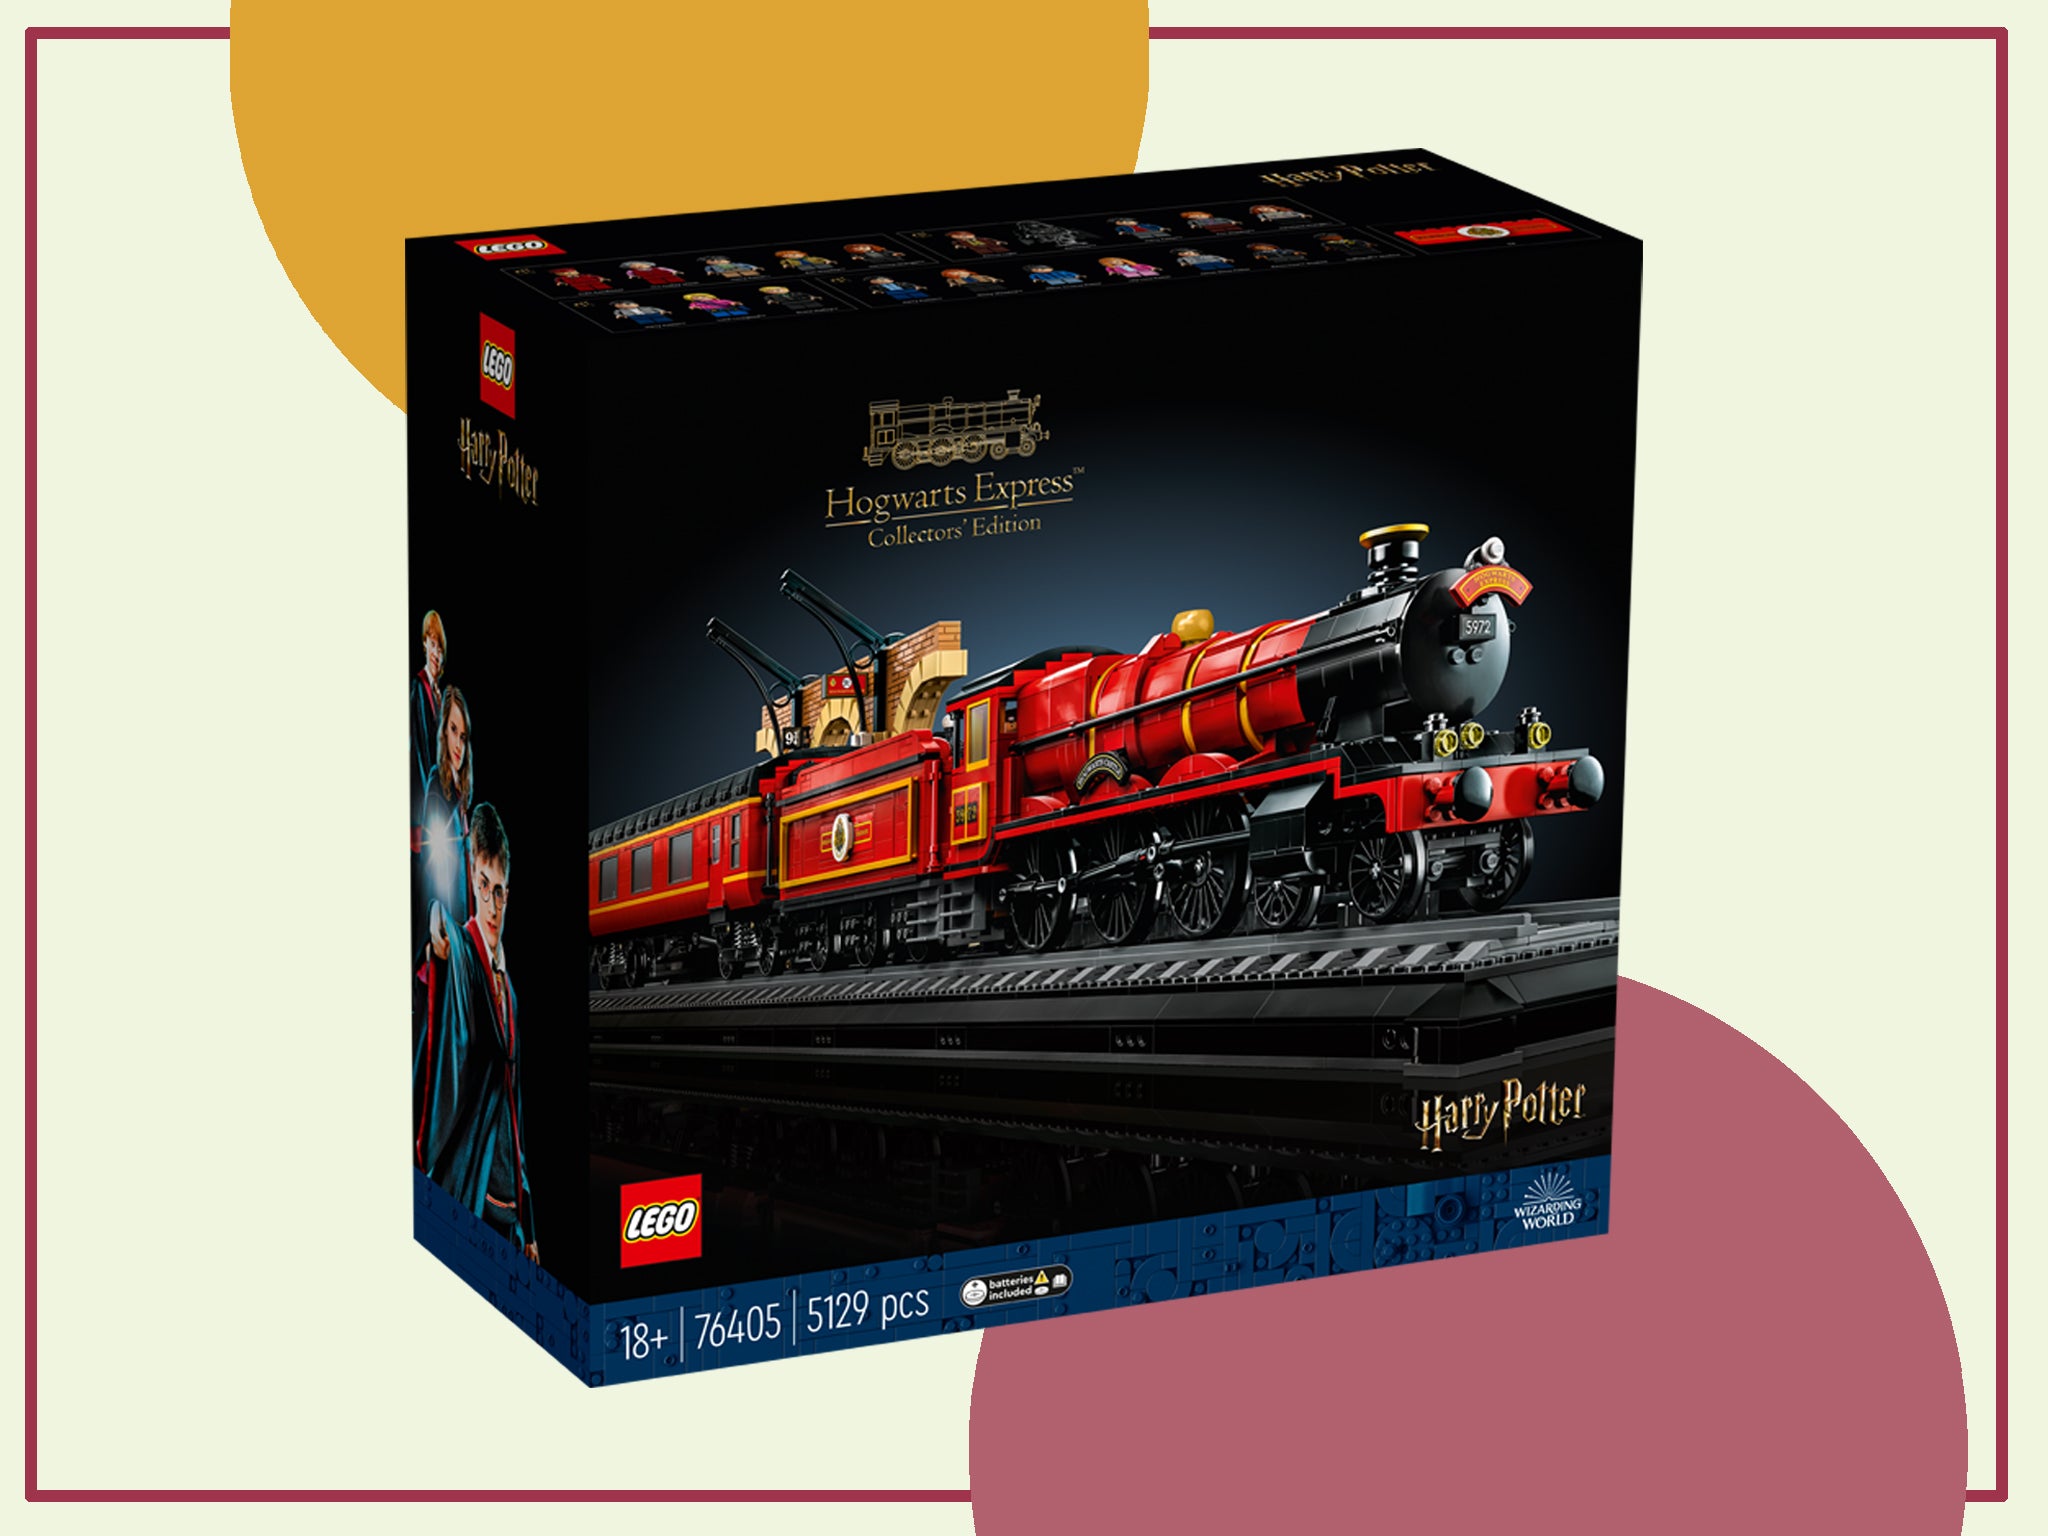 Lego Harry Potter Hogwarts Express Everything we know about the collectors edition, price, details and more The Independent pic